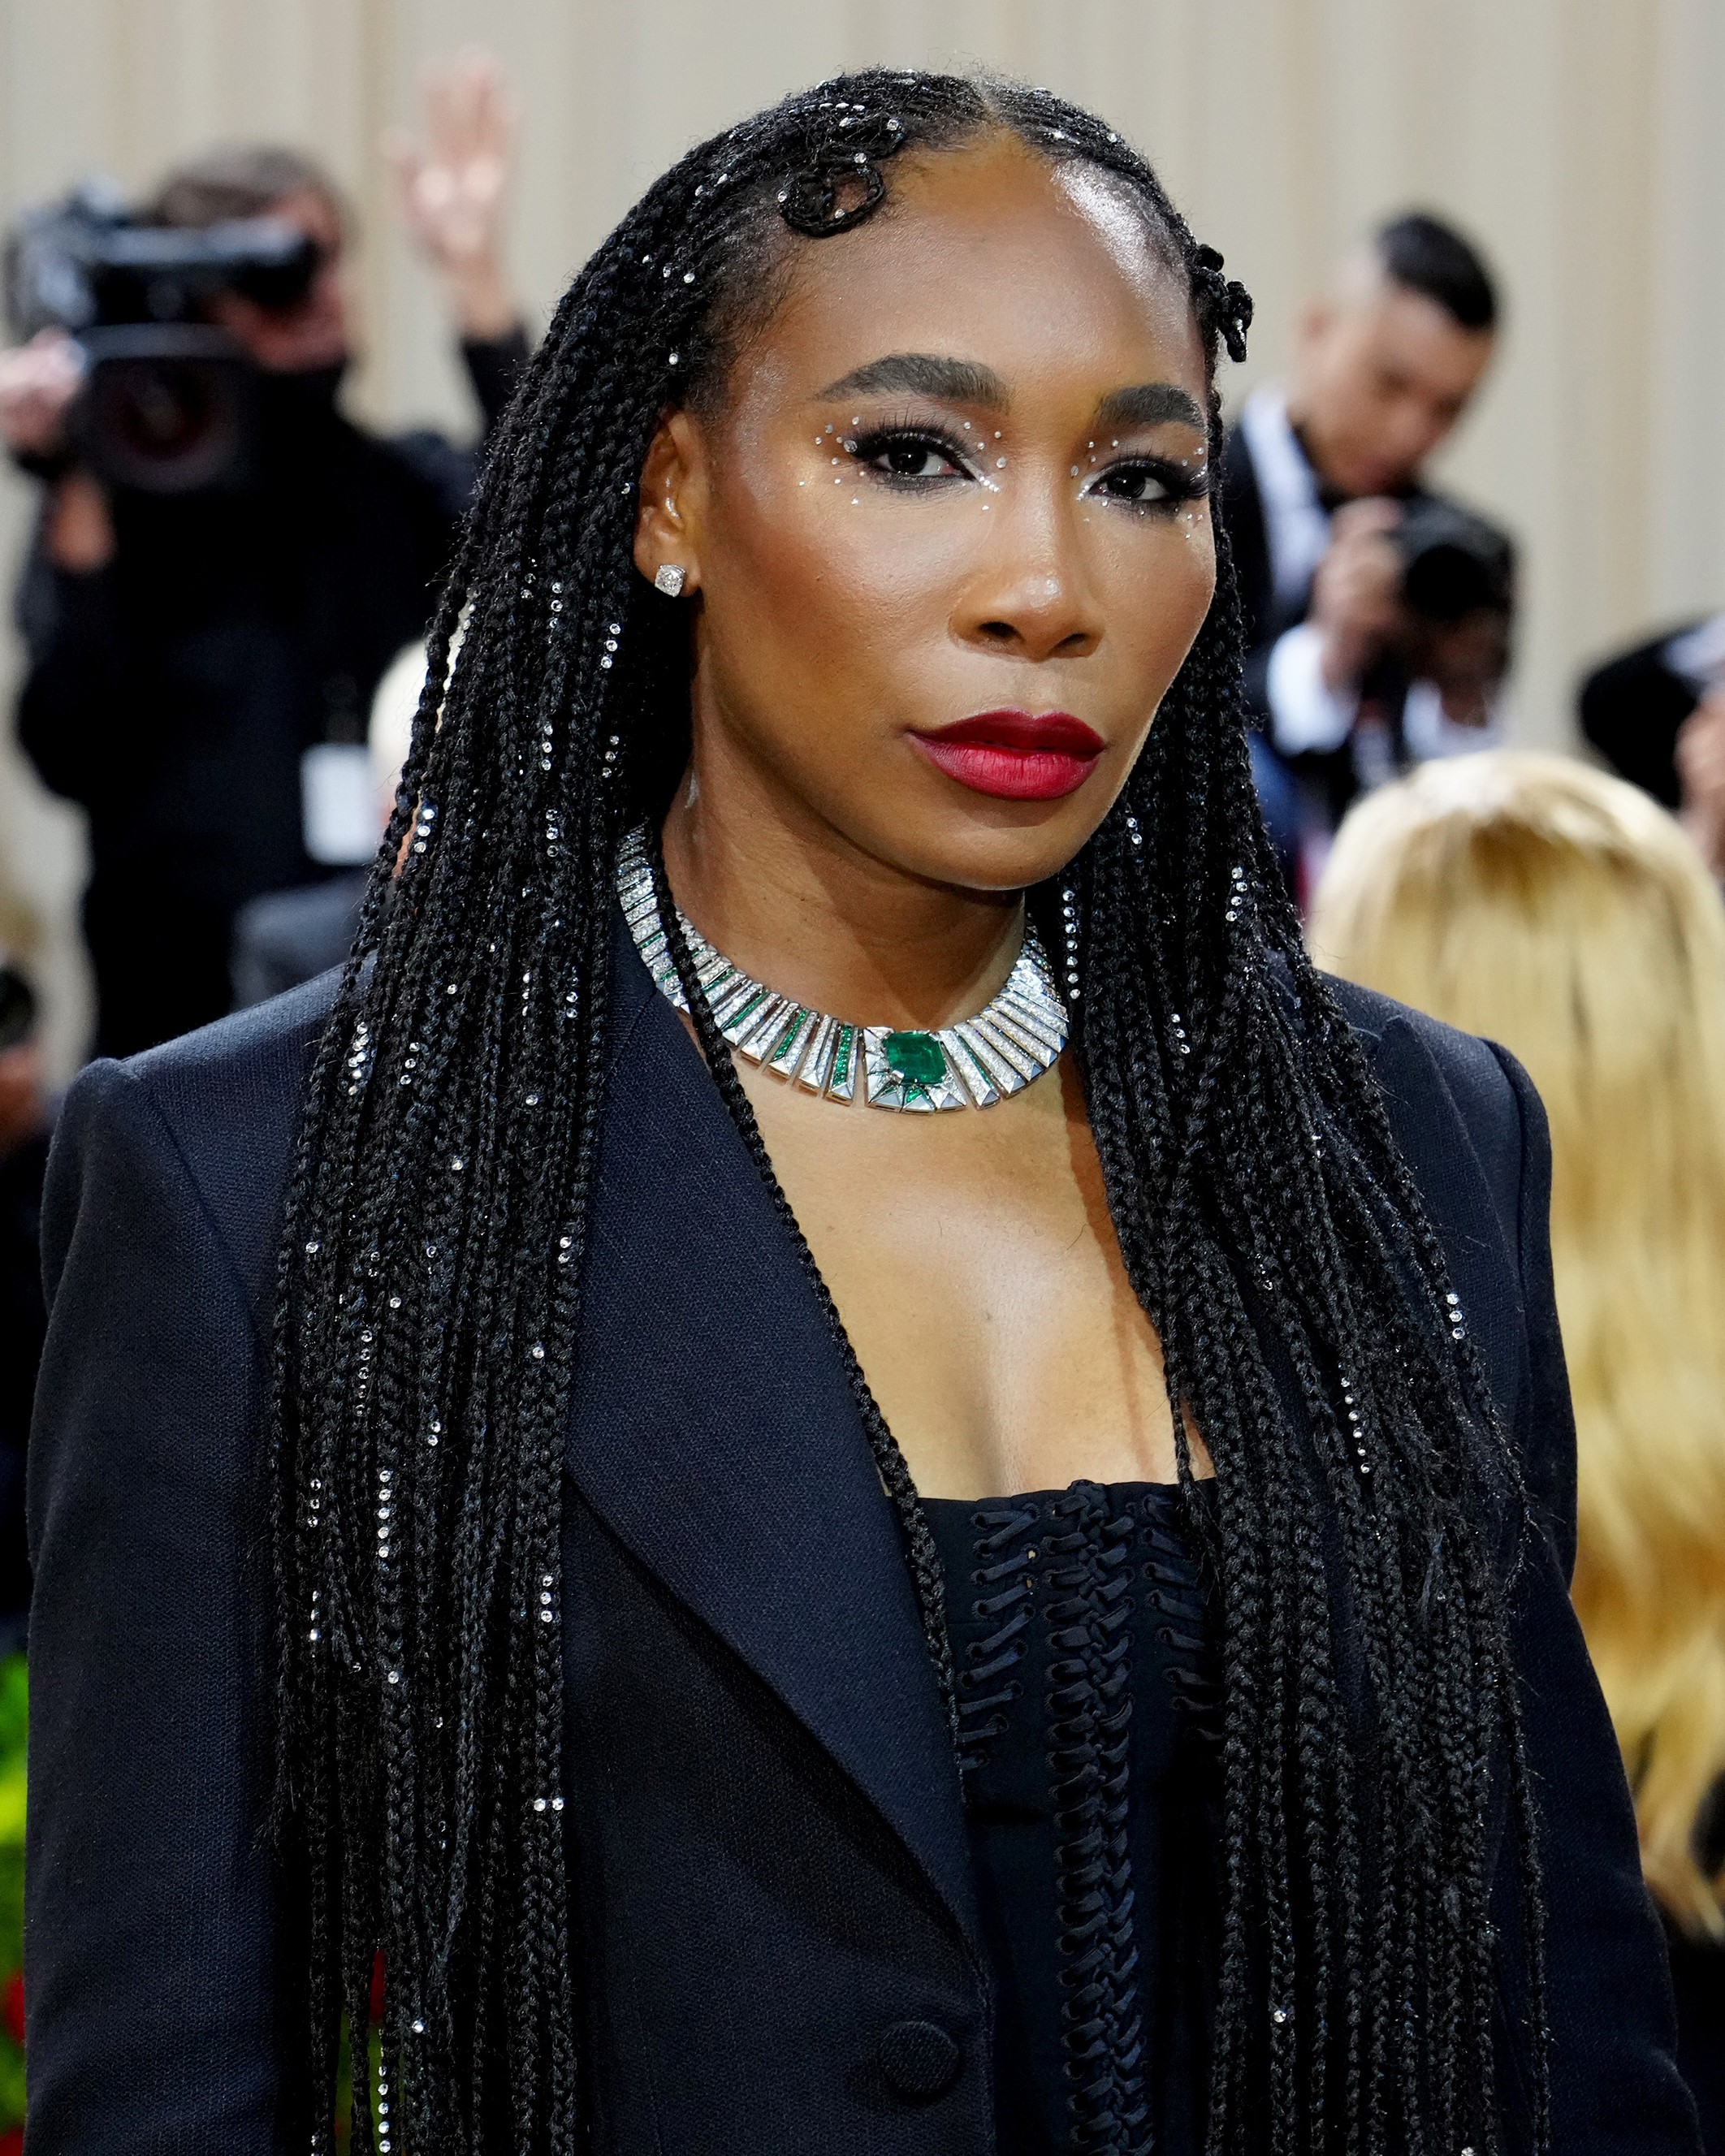 NEW YORK, NEW YORK - MAY 02: Venus Williams attends The 2022 Met Gala Celebrating "In America: An Anthology of Fashion" at The Metropolitan Museum of Art on May 02, 2022 in New York City. (Photo by Jeff Kravitz/FilmMagic) (Foto: FilmMagic)